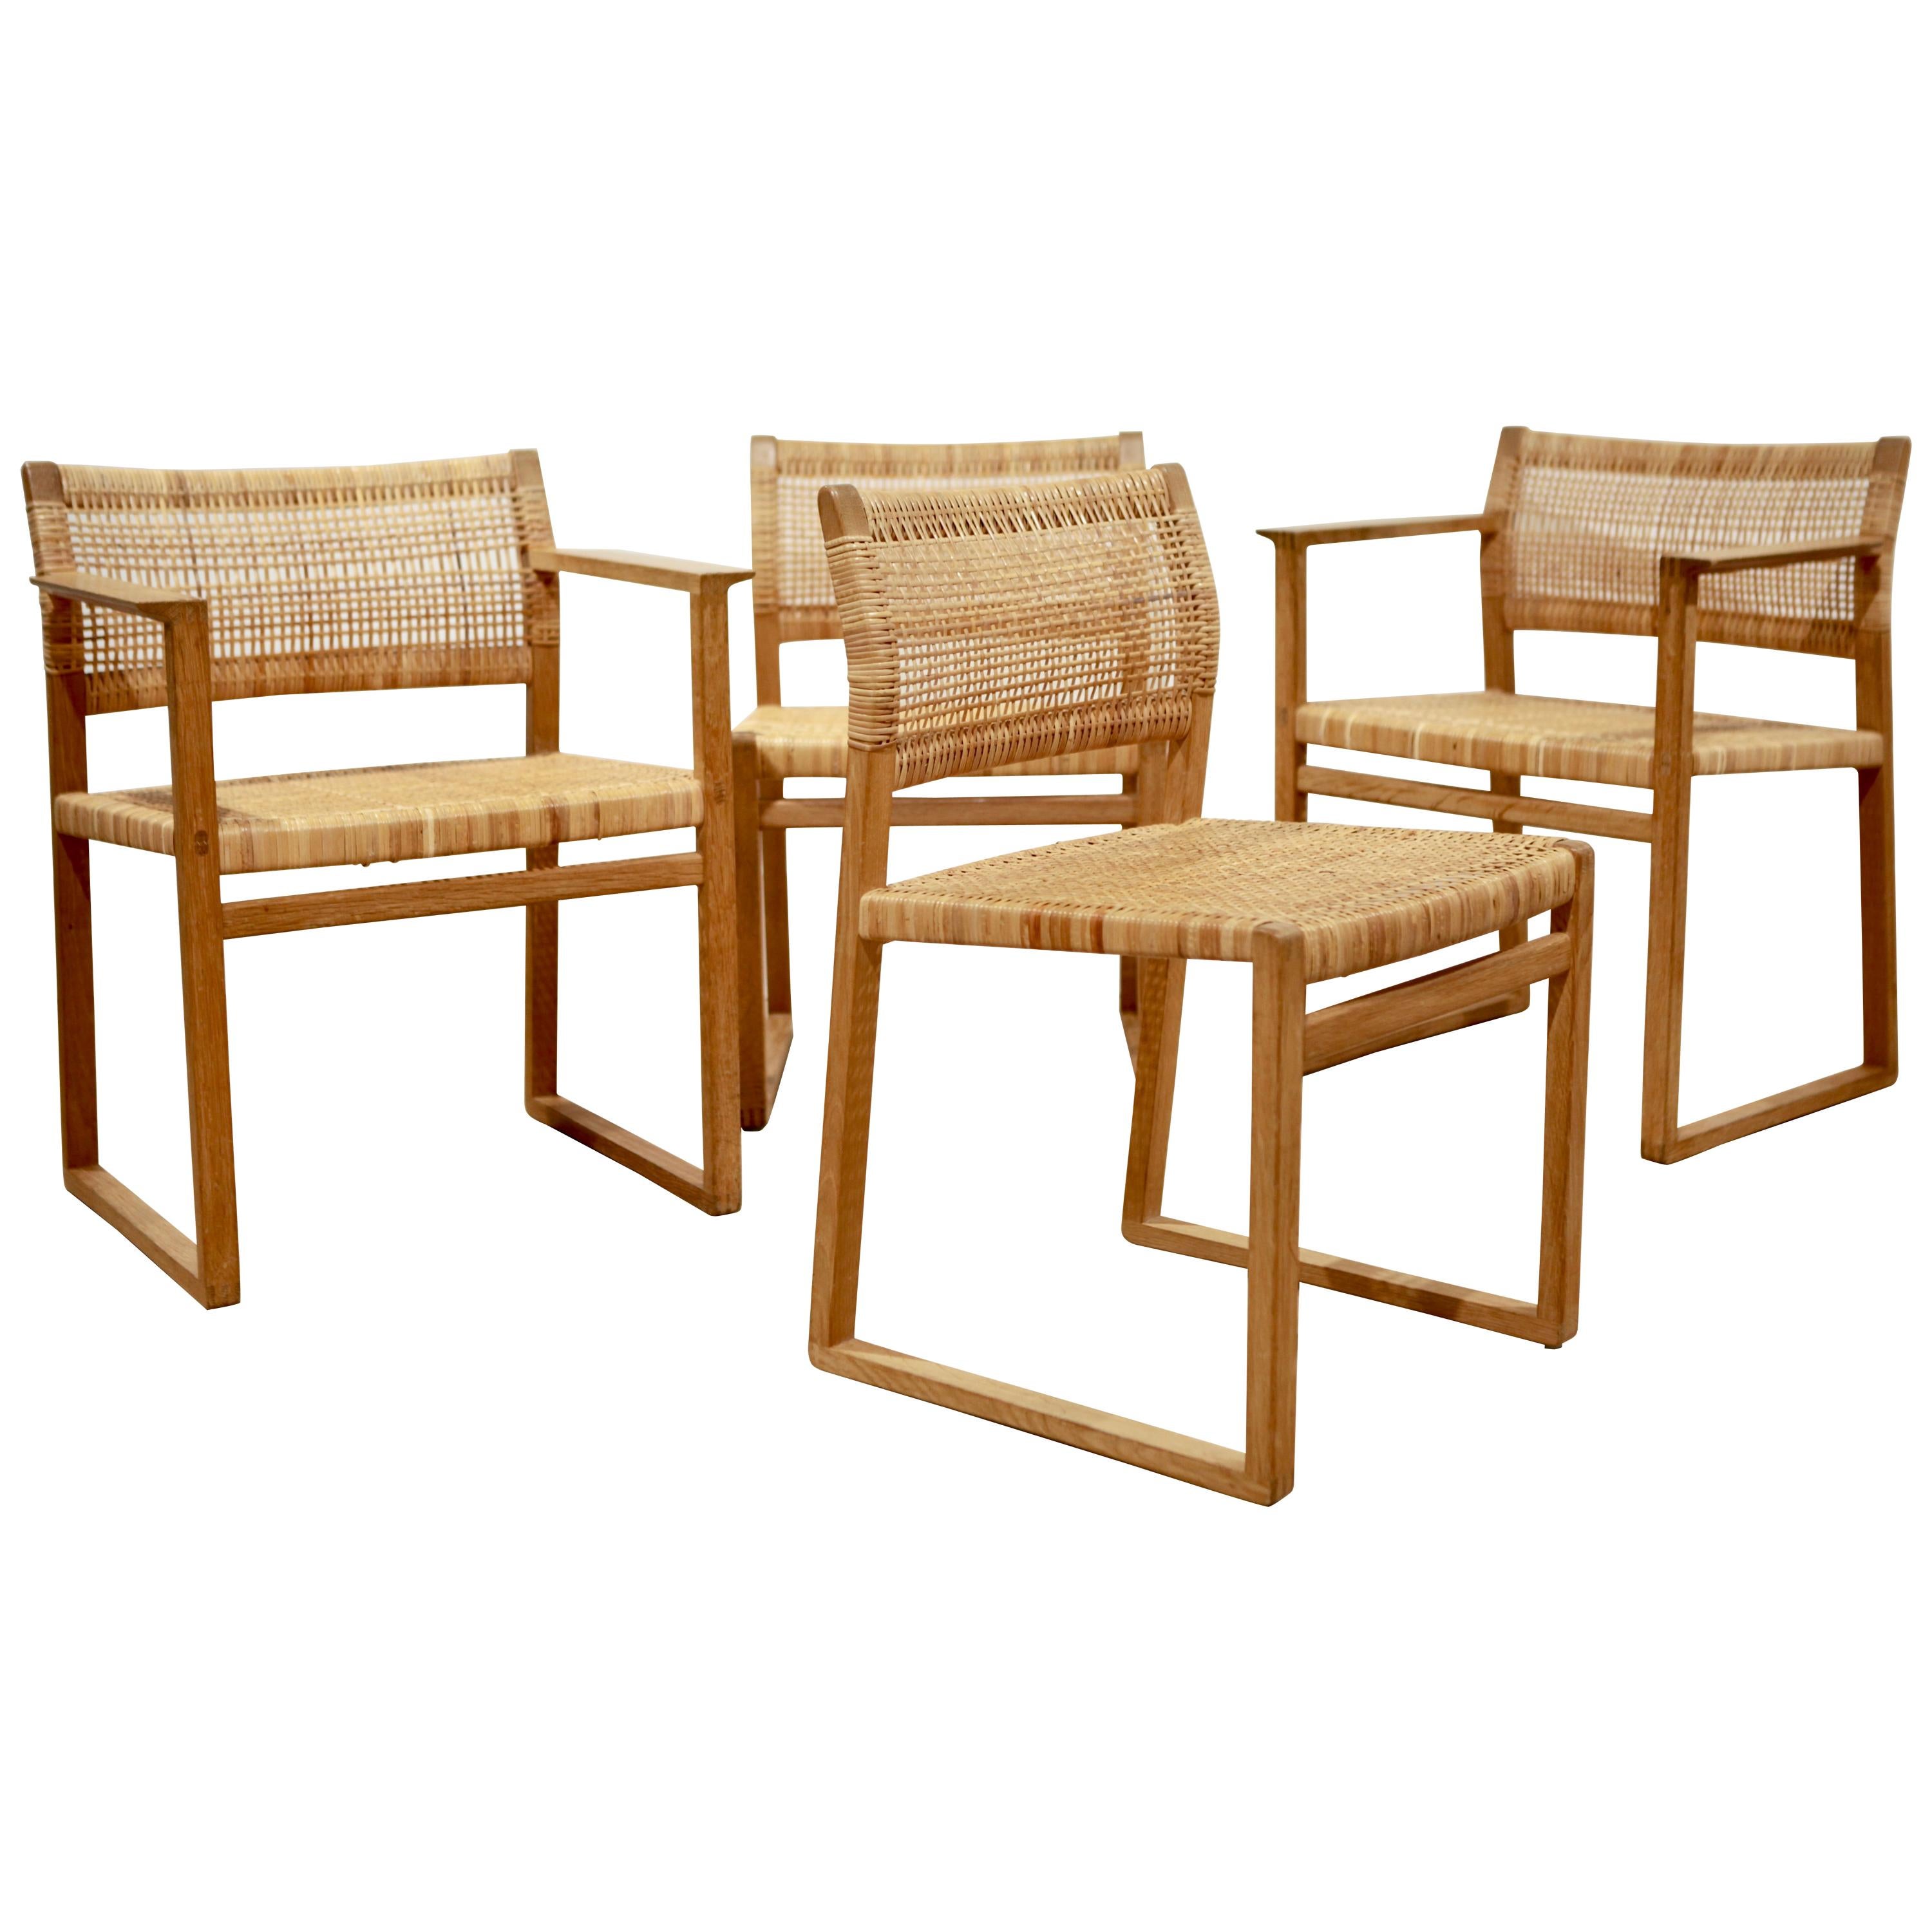 Børge Mogensen, Dining Chairs in Oak and Woven Cane, Denmark, 1957